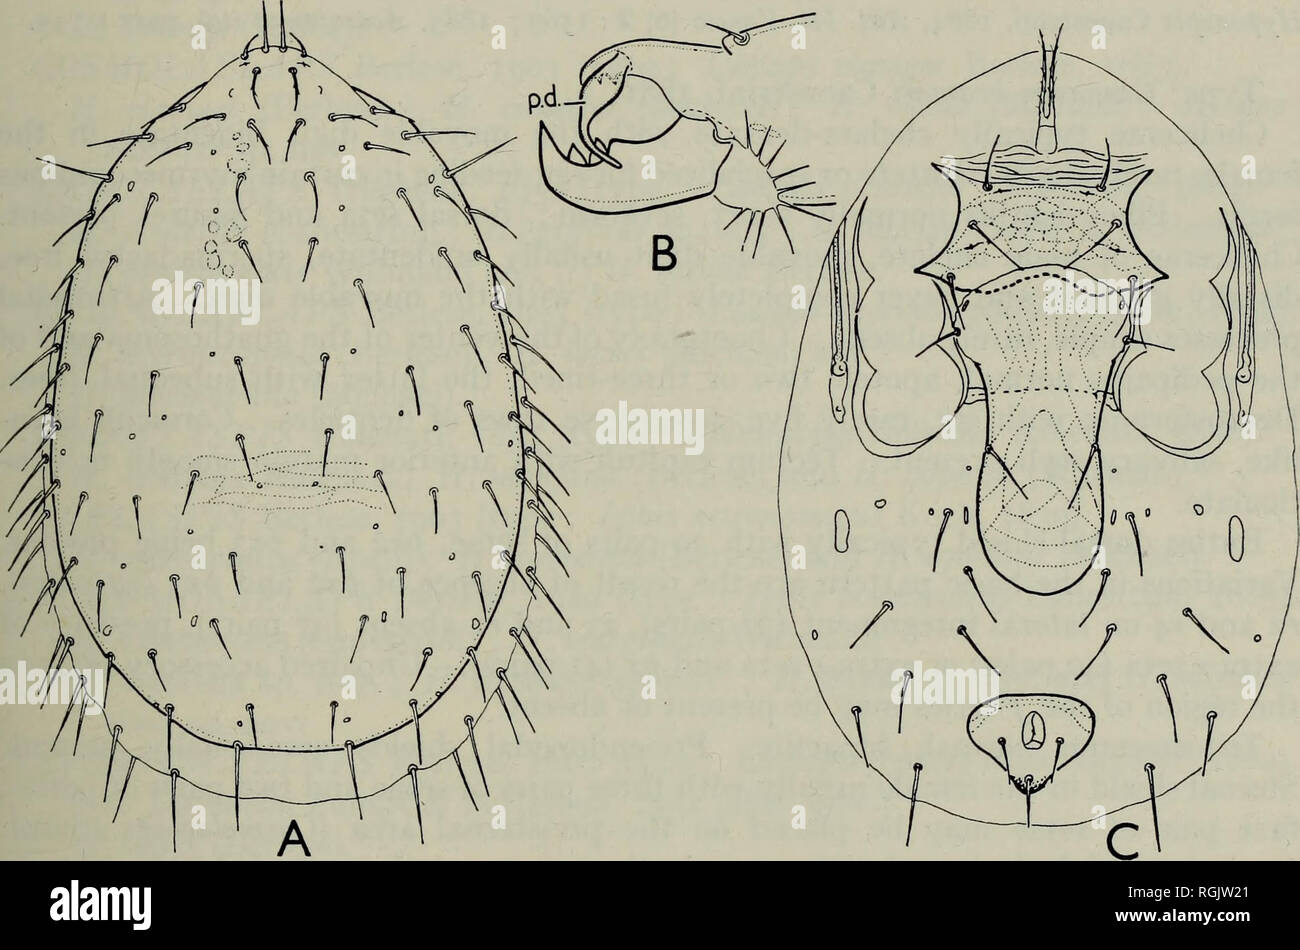 . Bulletin of the British Museum (Natural History) Zoology. THE BRITISH DERMANYSSIDAE (ACARI) 157 Female : Chelicera with segment I, 72 /x; II, 126 /x ; movable digit 36 /x, bidentate ; fixed digit bidentate ; pilus dentilis inflated basally, distal portion slender, curved (Text-fig. 12b). Four pairs of gnathosomal setae with c.s. about 72 /x apart ; hyp.2 about 54 /x apart. Deutosternum with six transverse rows of denticles (3-5 per row) ; corniculi 30 /x long ; internal malae fringed. Tectum capituli with smooth anterior margin. Salivary styli slender, extending to tips of corniculi. Pedipal Stock Photo